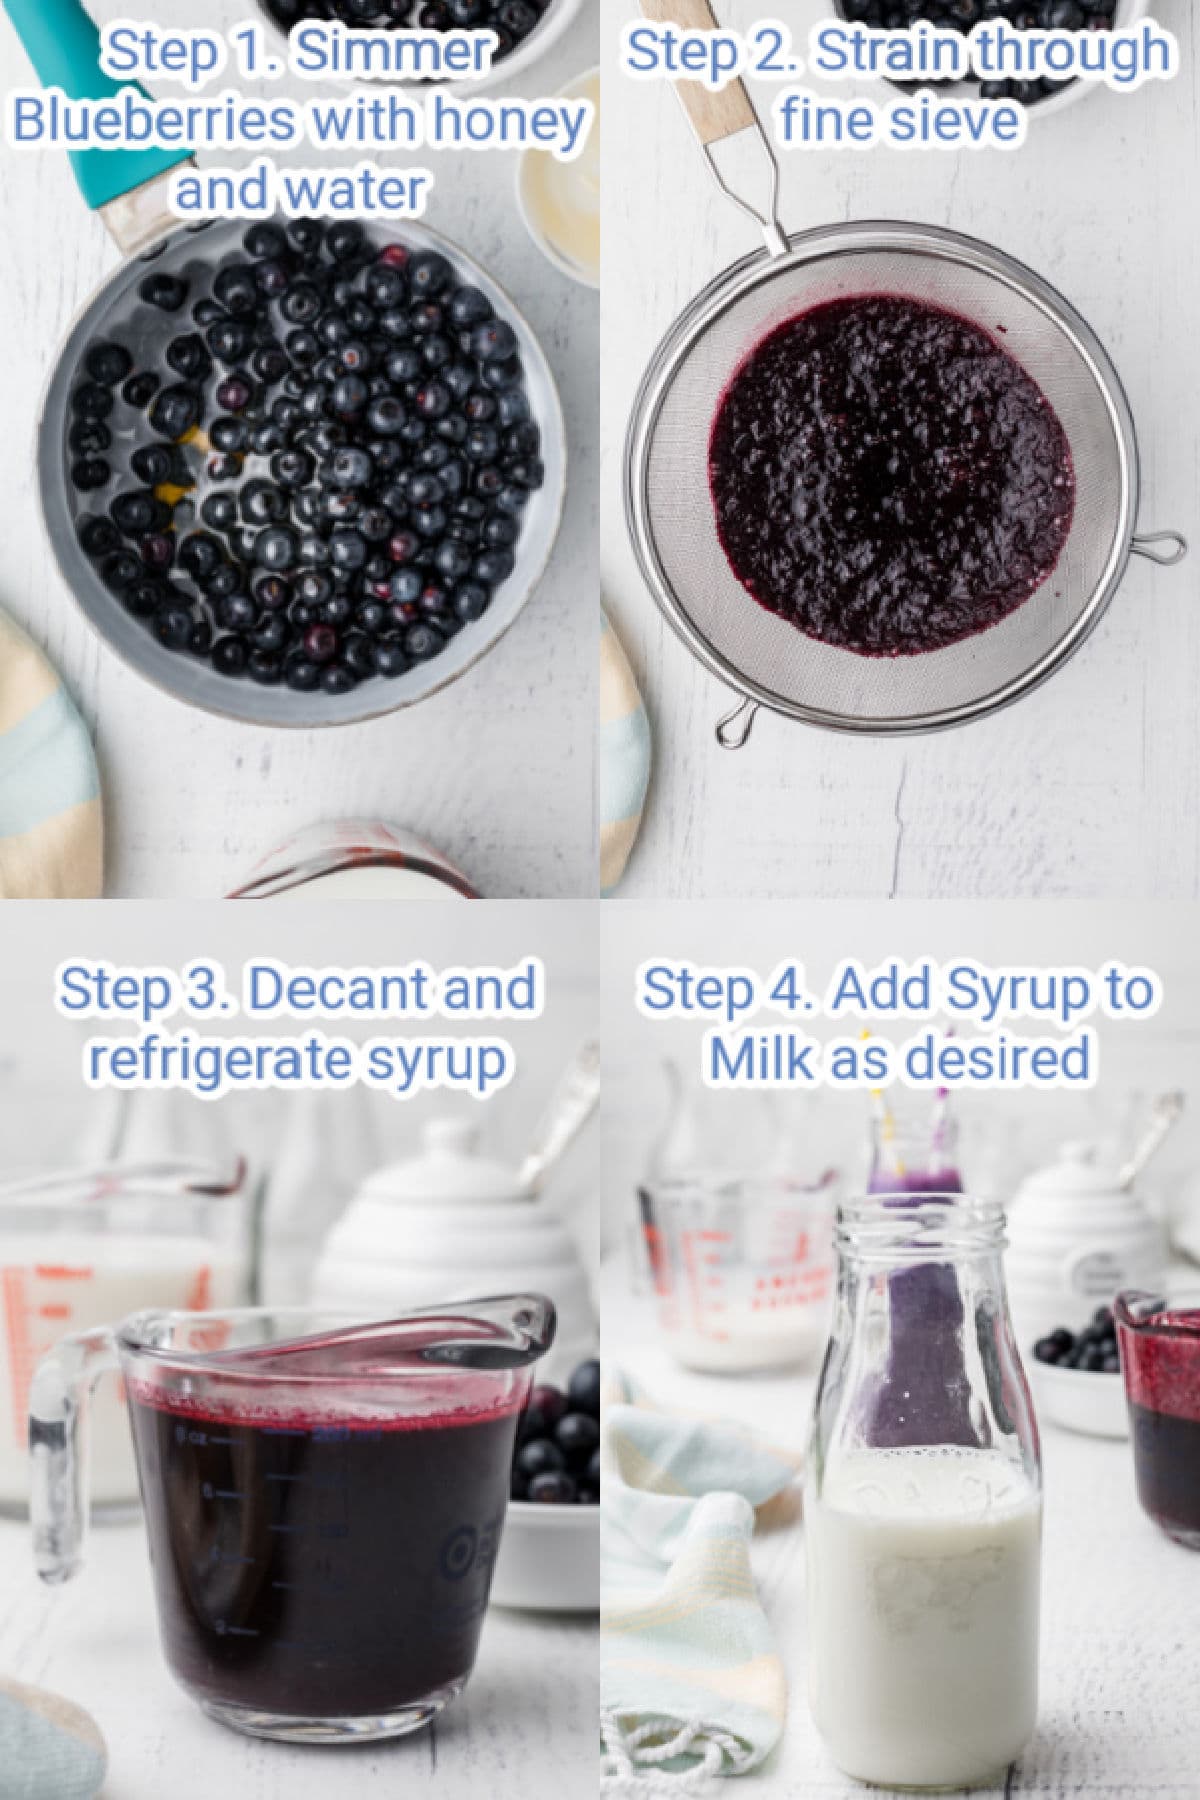 four images showing the recipe steps to make blueberry milk